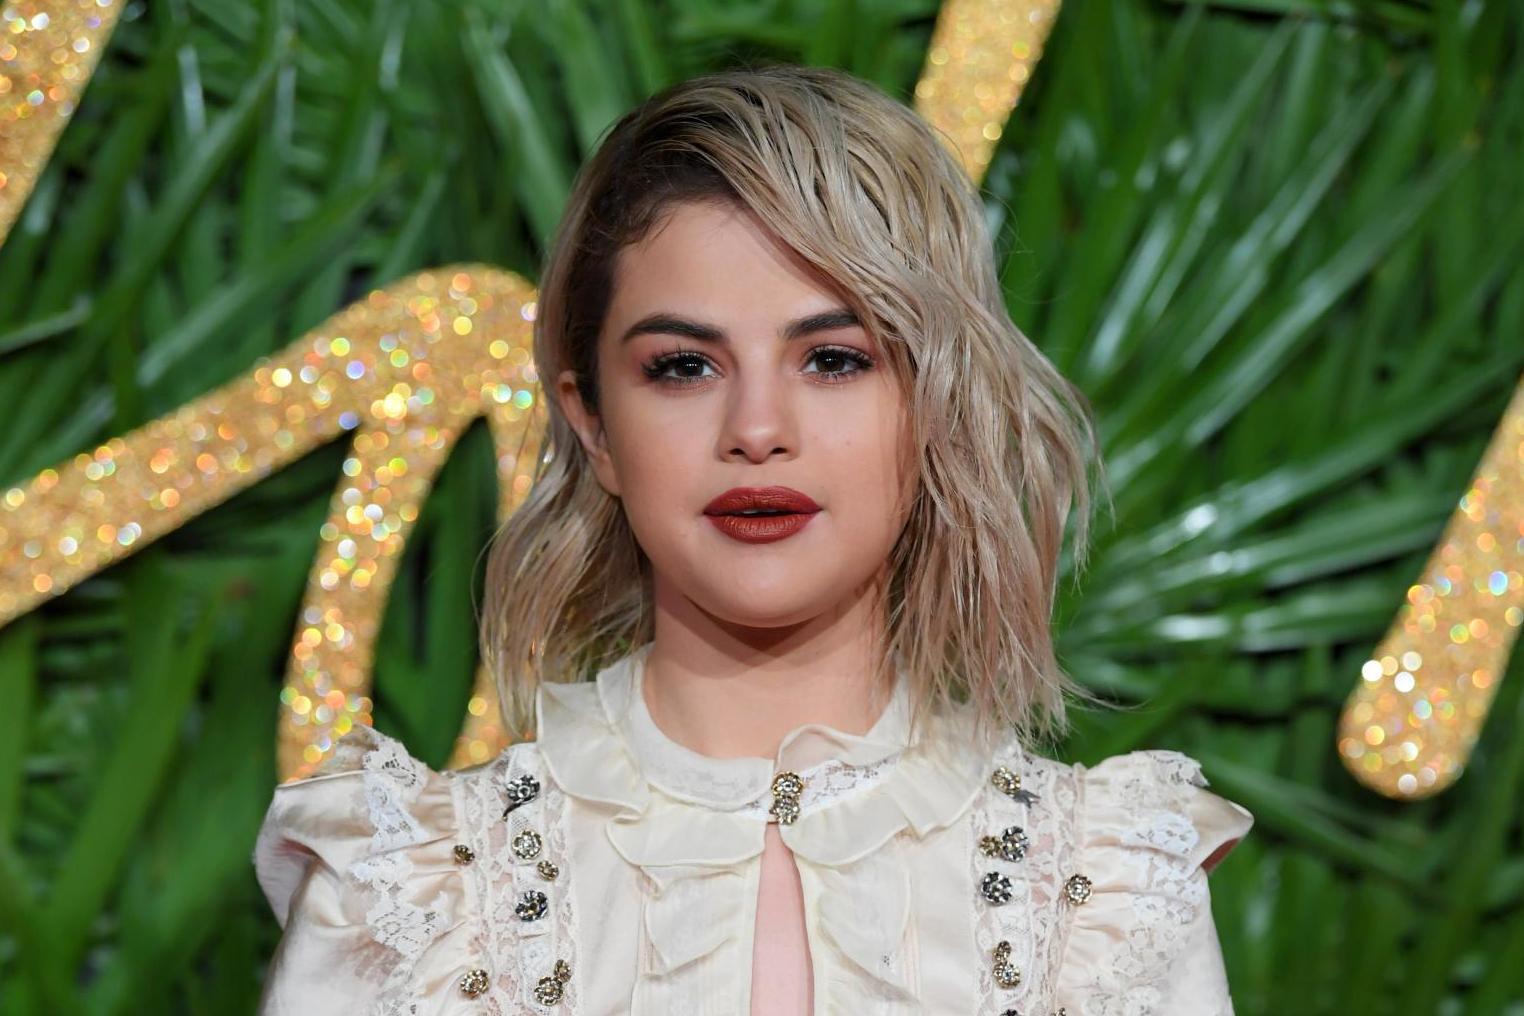 Selena Gomez recently underwent a kidney transplant thanks to her battle with lupus